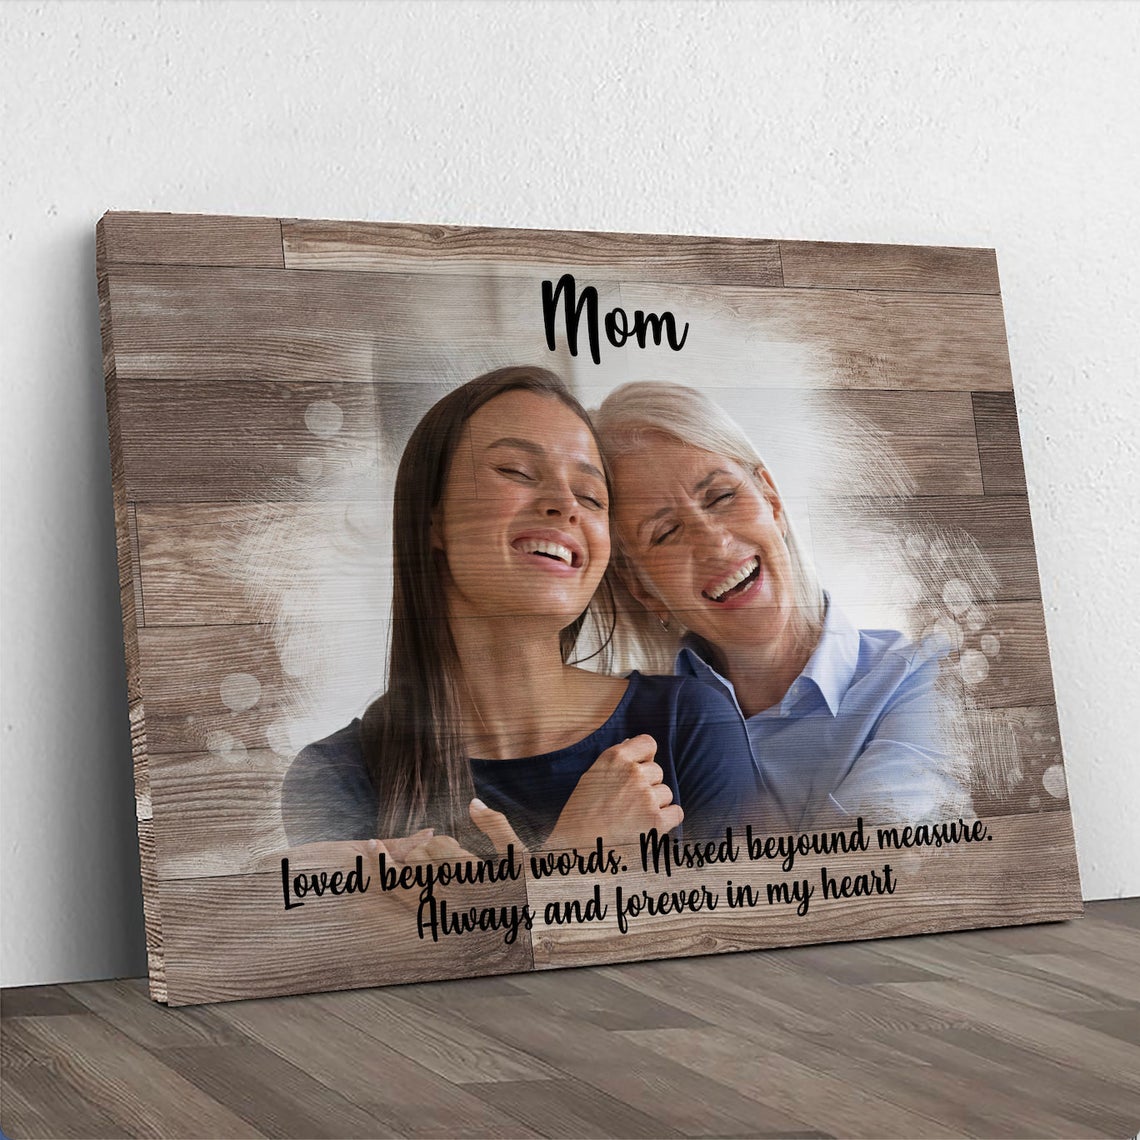 A Mother's Memory Sign - Image by Tailored Canvases